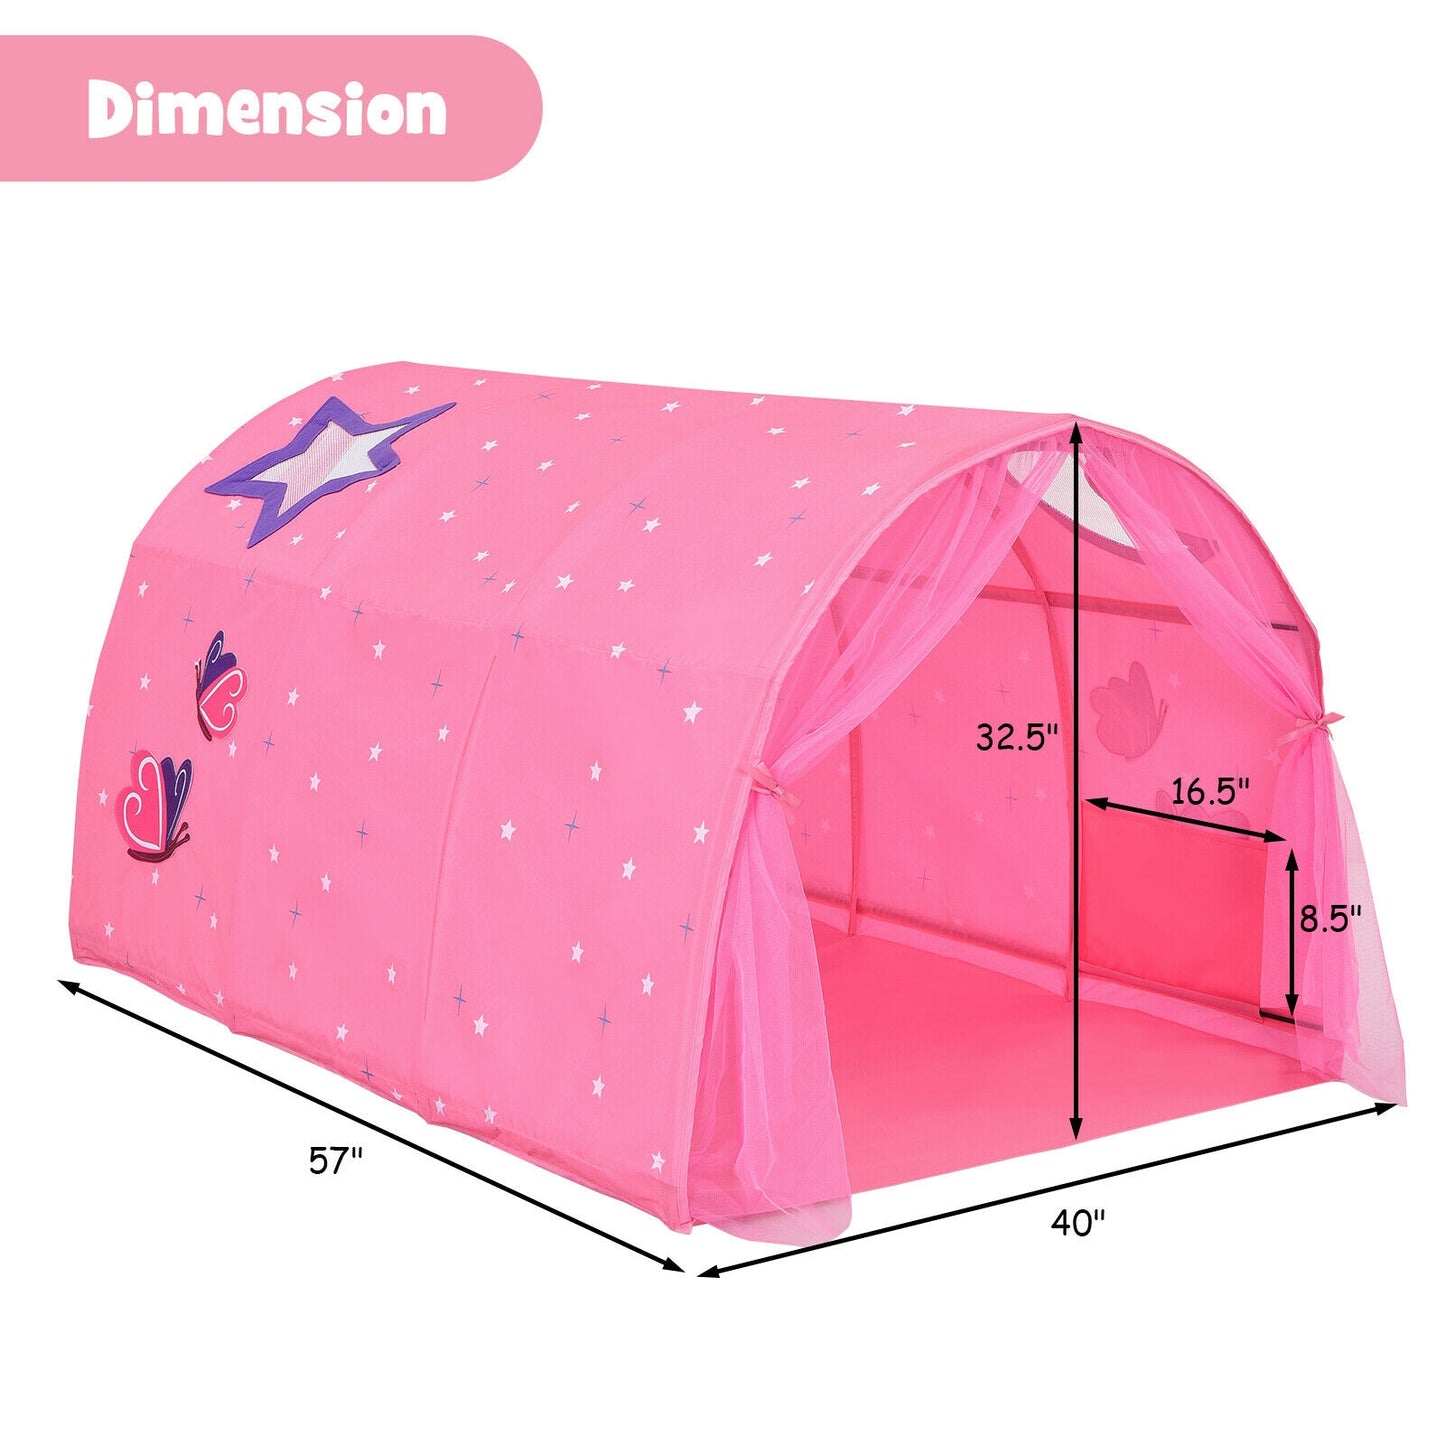 Kids Galaxy Starry Sky Dream Portable Play Tent with Double Net Curtain-Pink